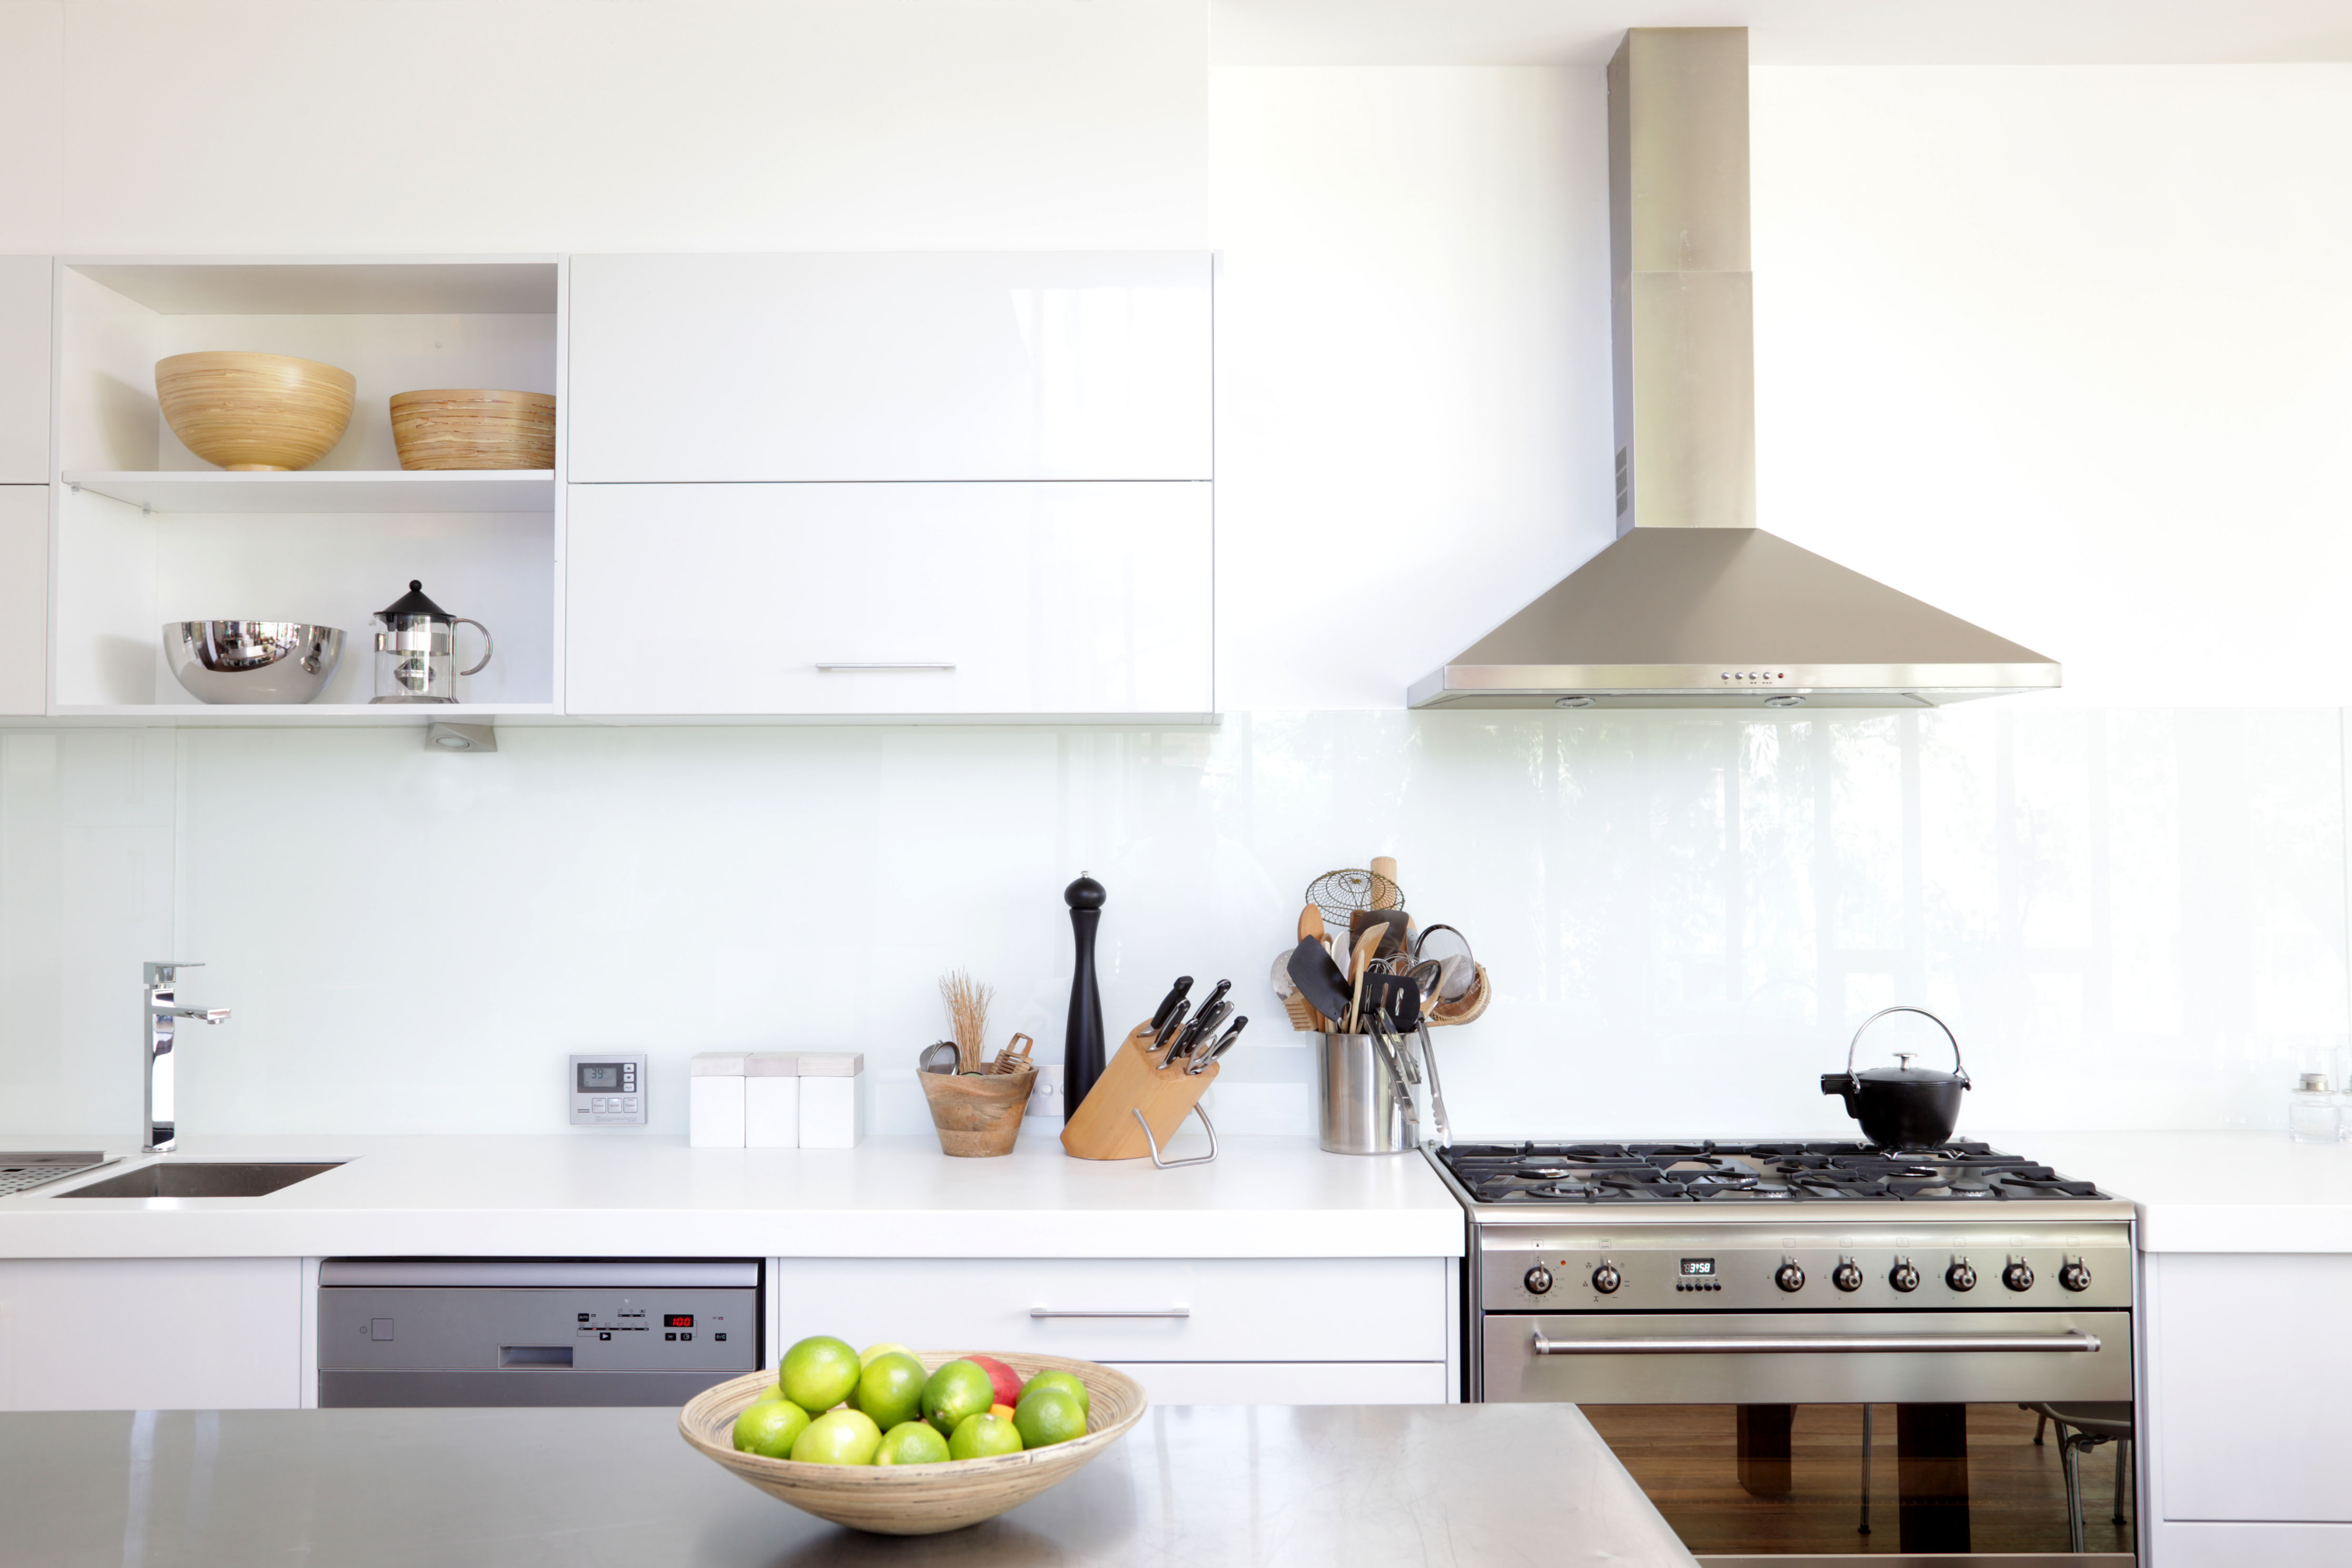 The Ultimate 30 and 36 Inch Range Hood Guide